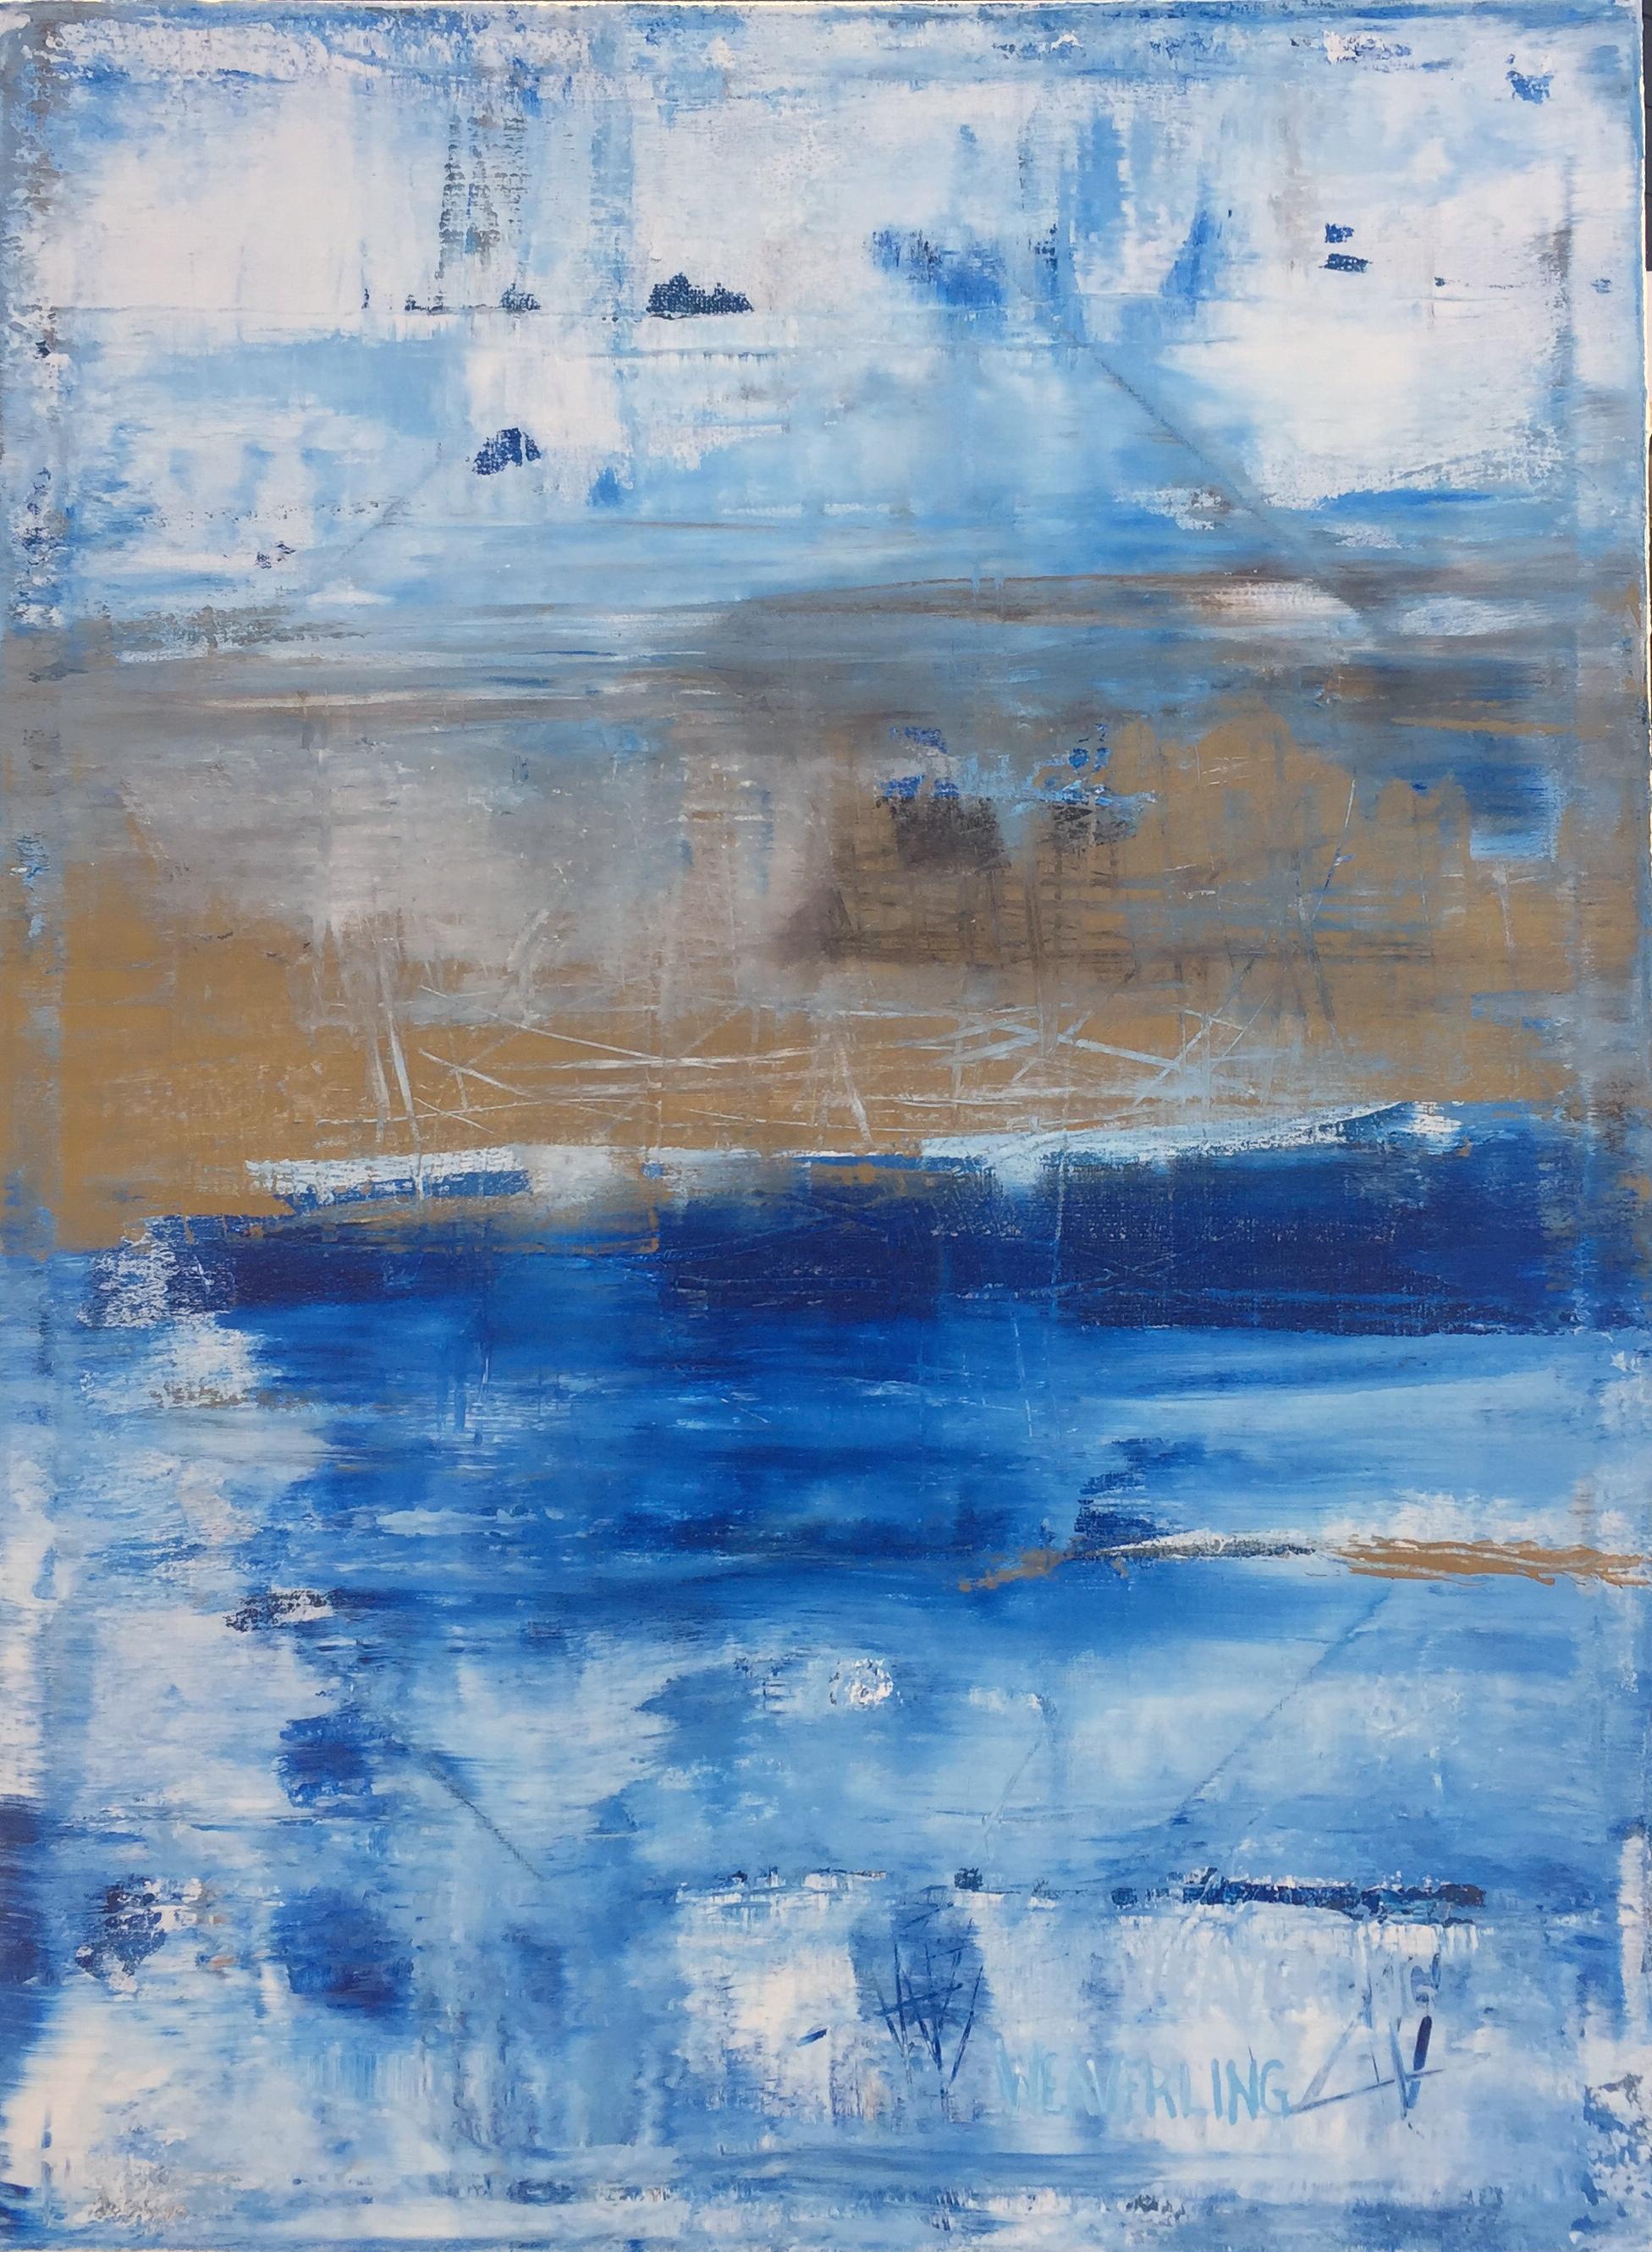 Stormy, Abstract Painting - Art by Julie Weaverling